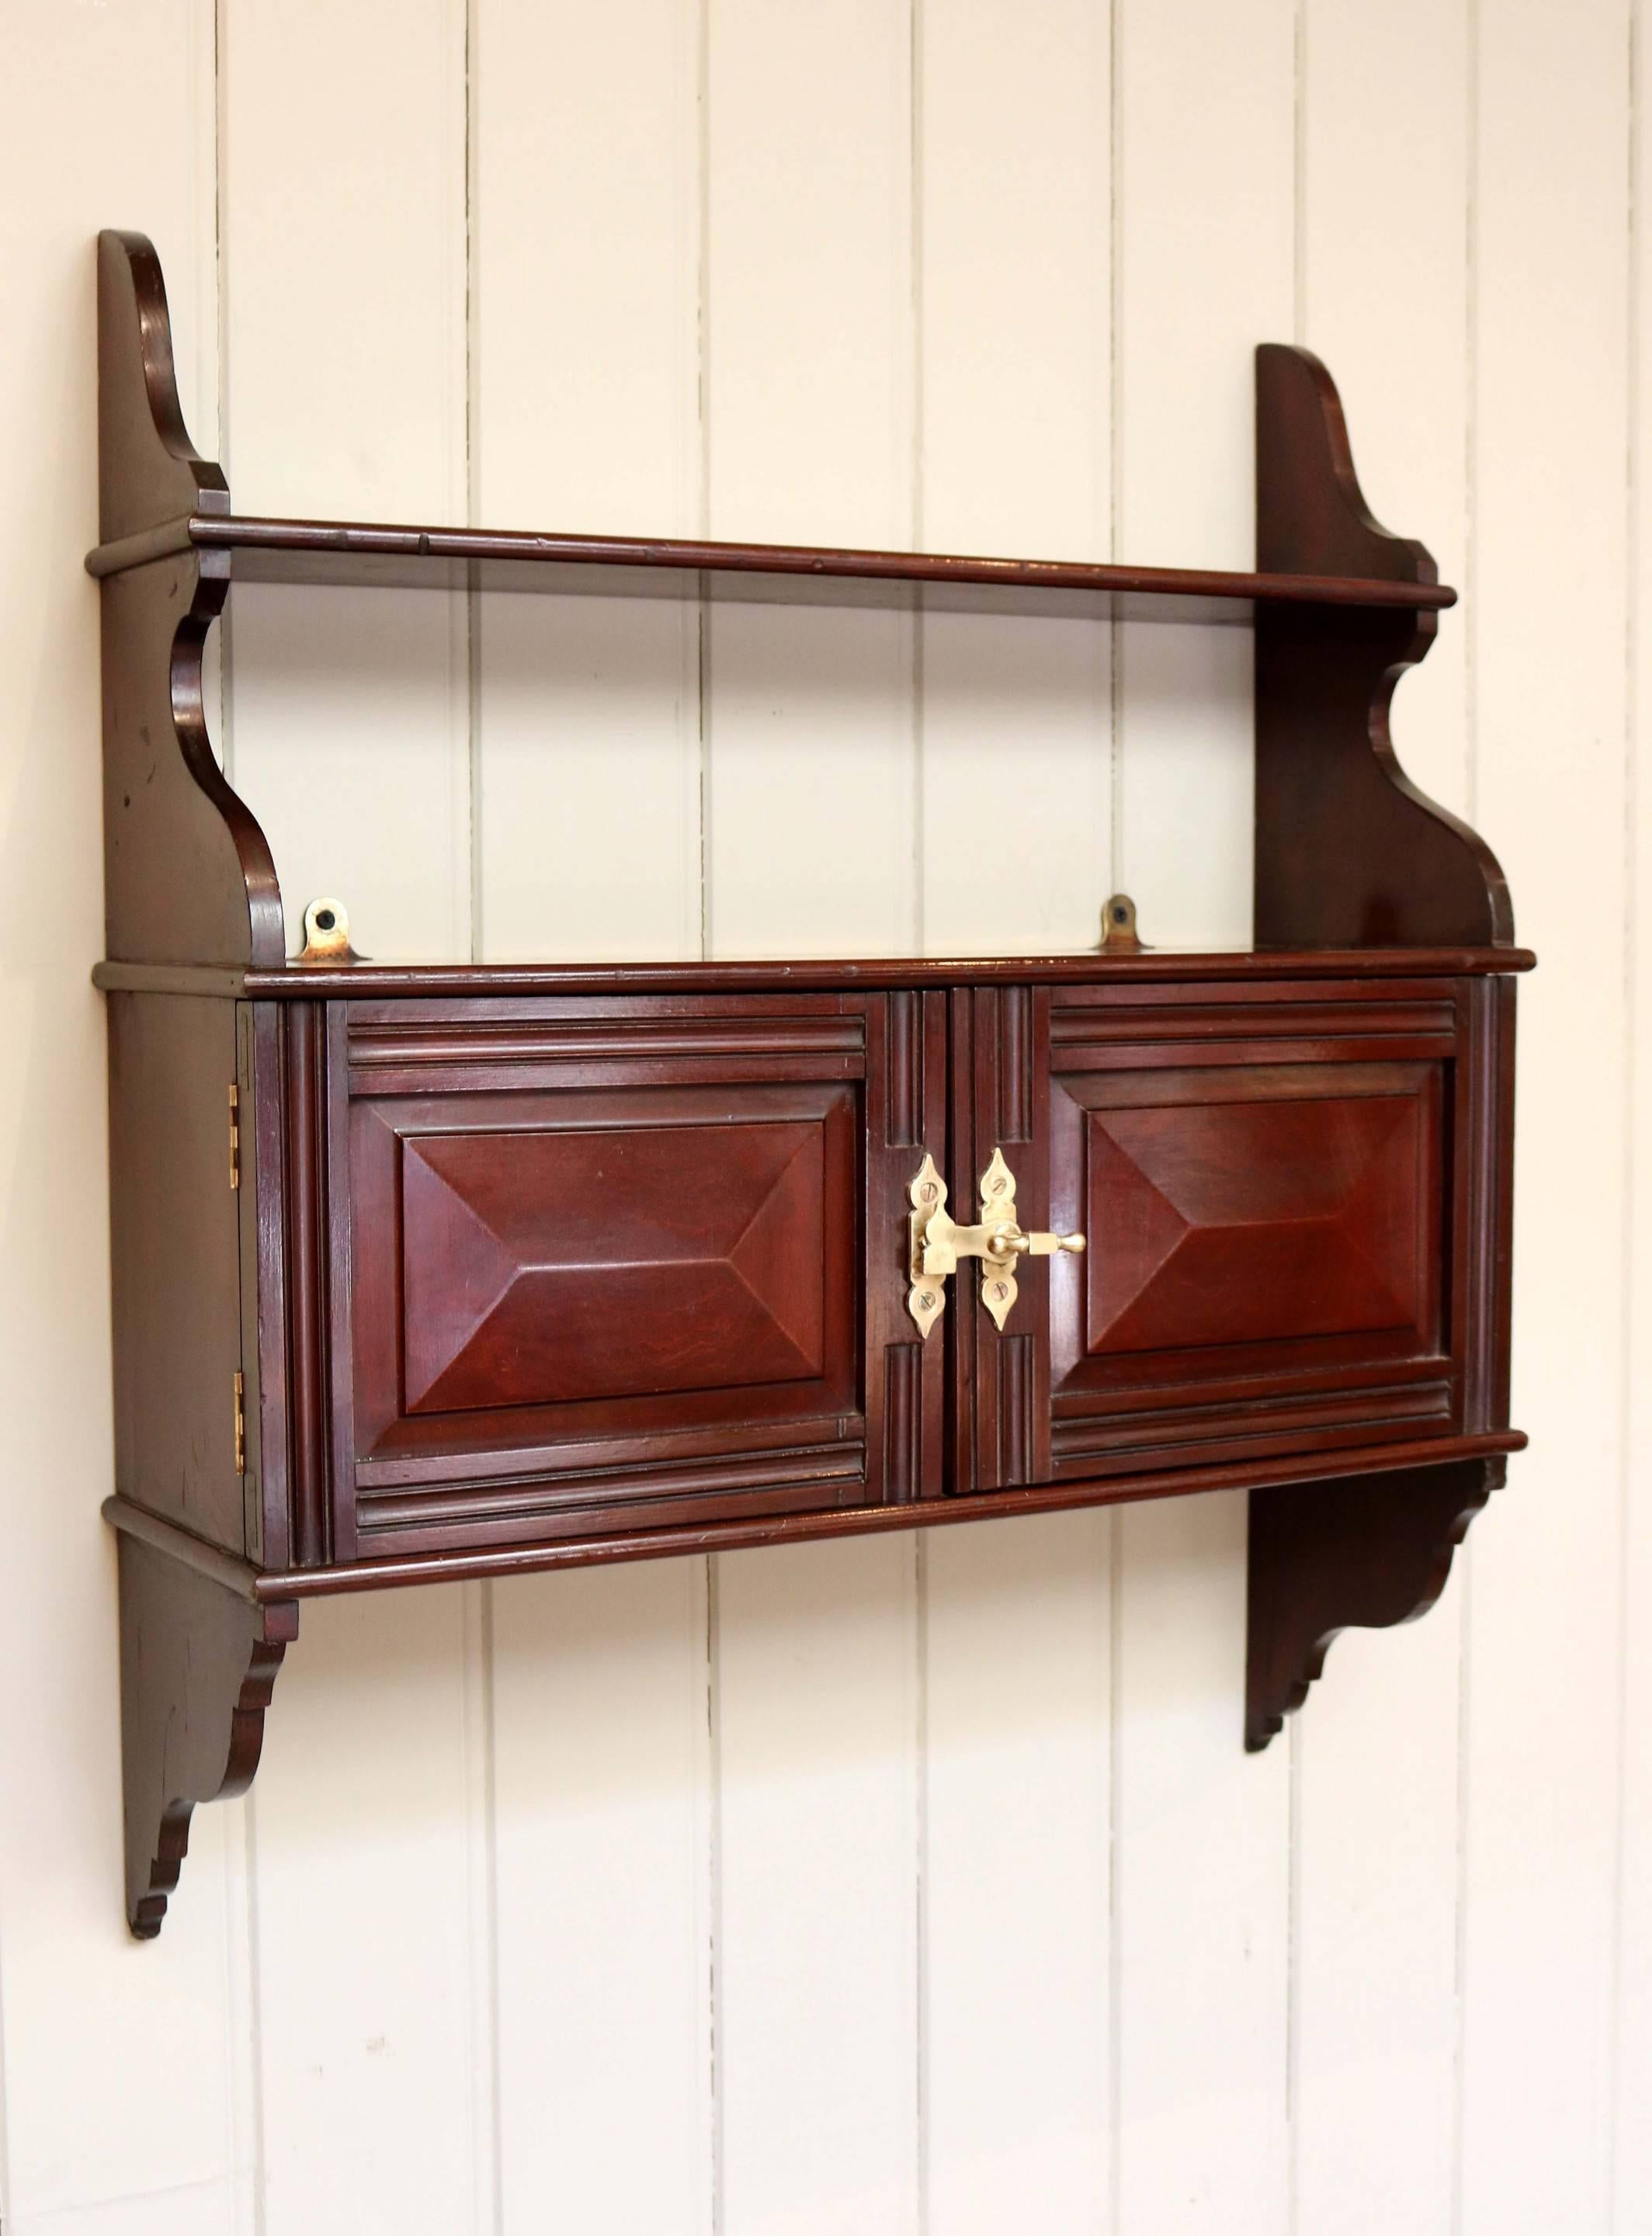 Edwardian mahogany finish two-door wall cabinet with an upper tier.